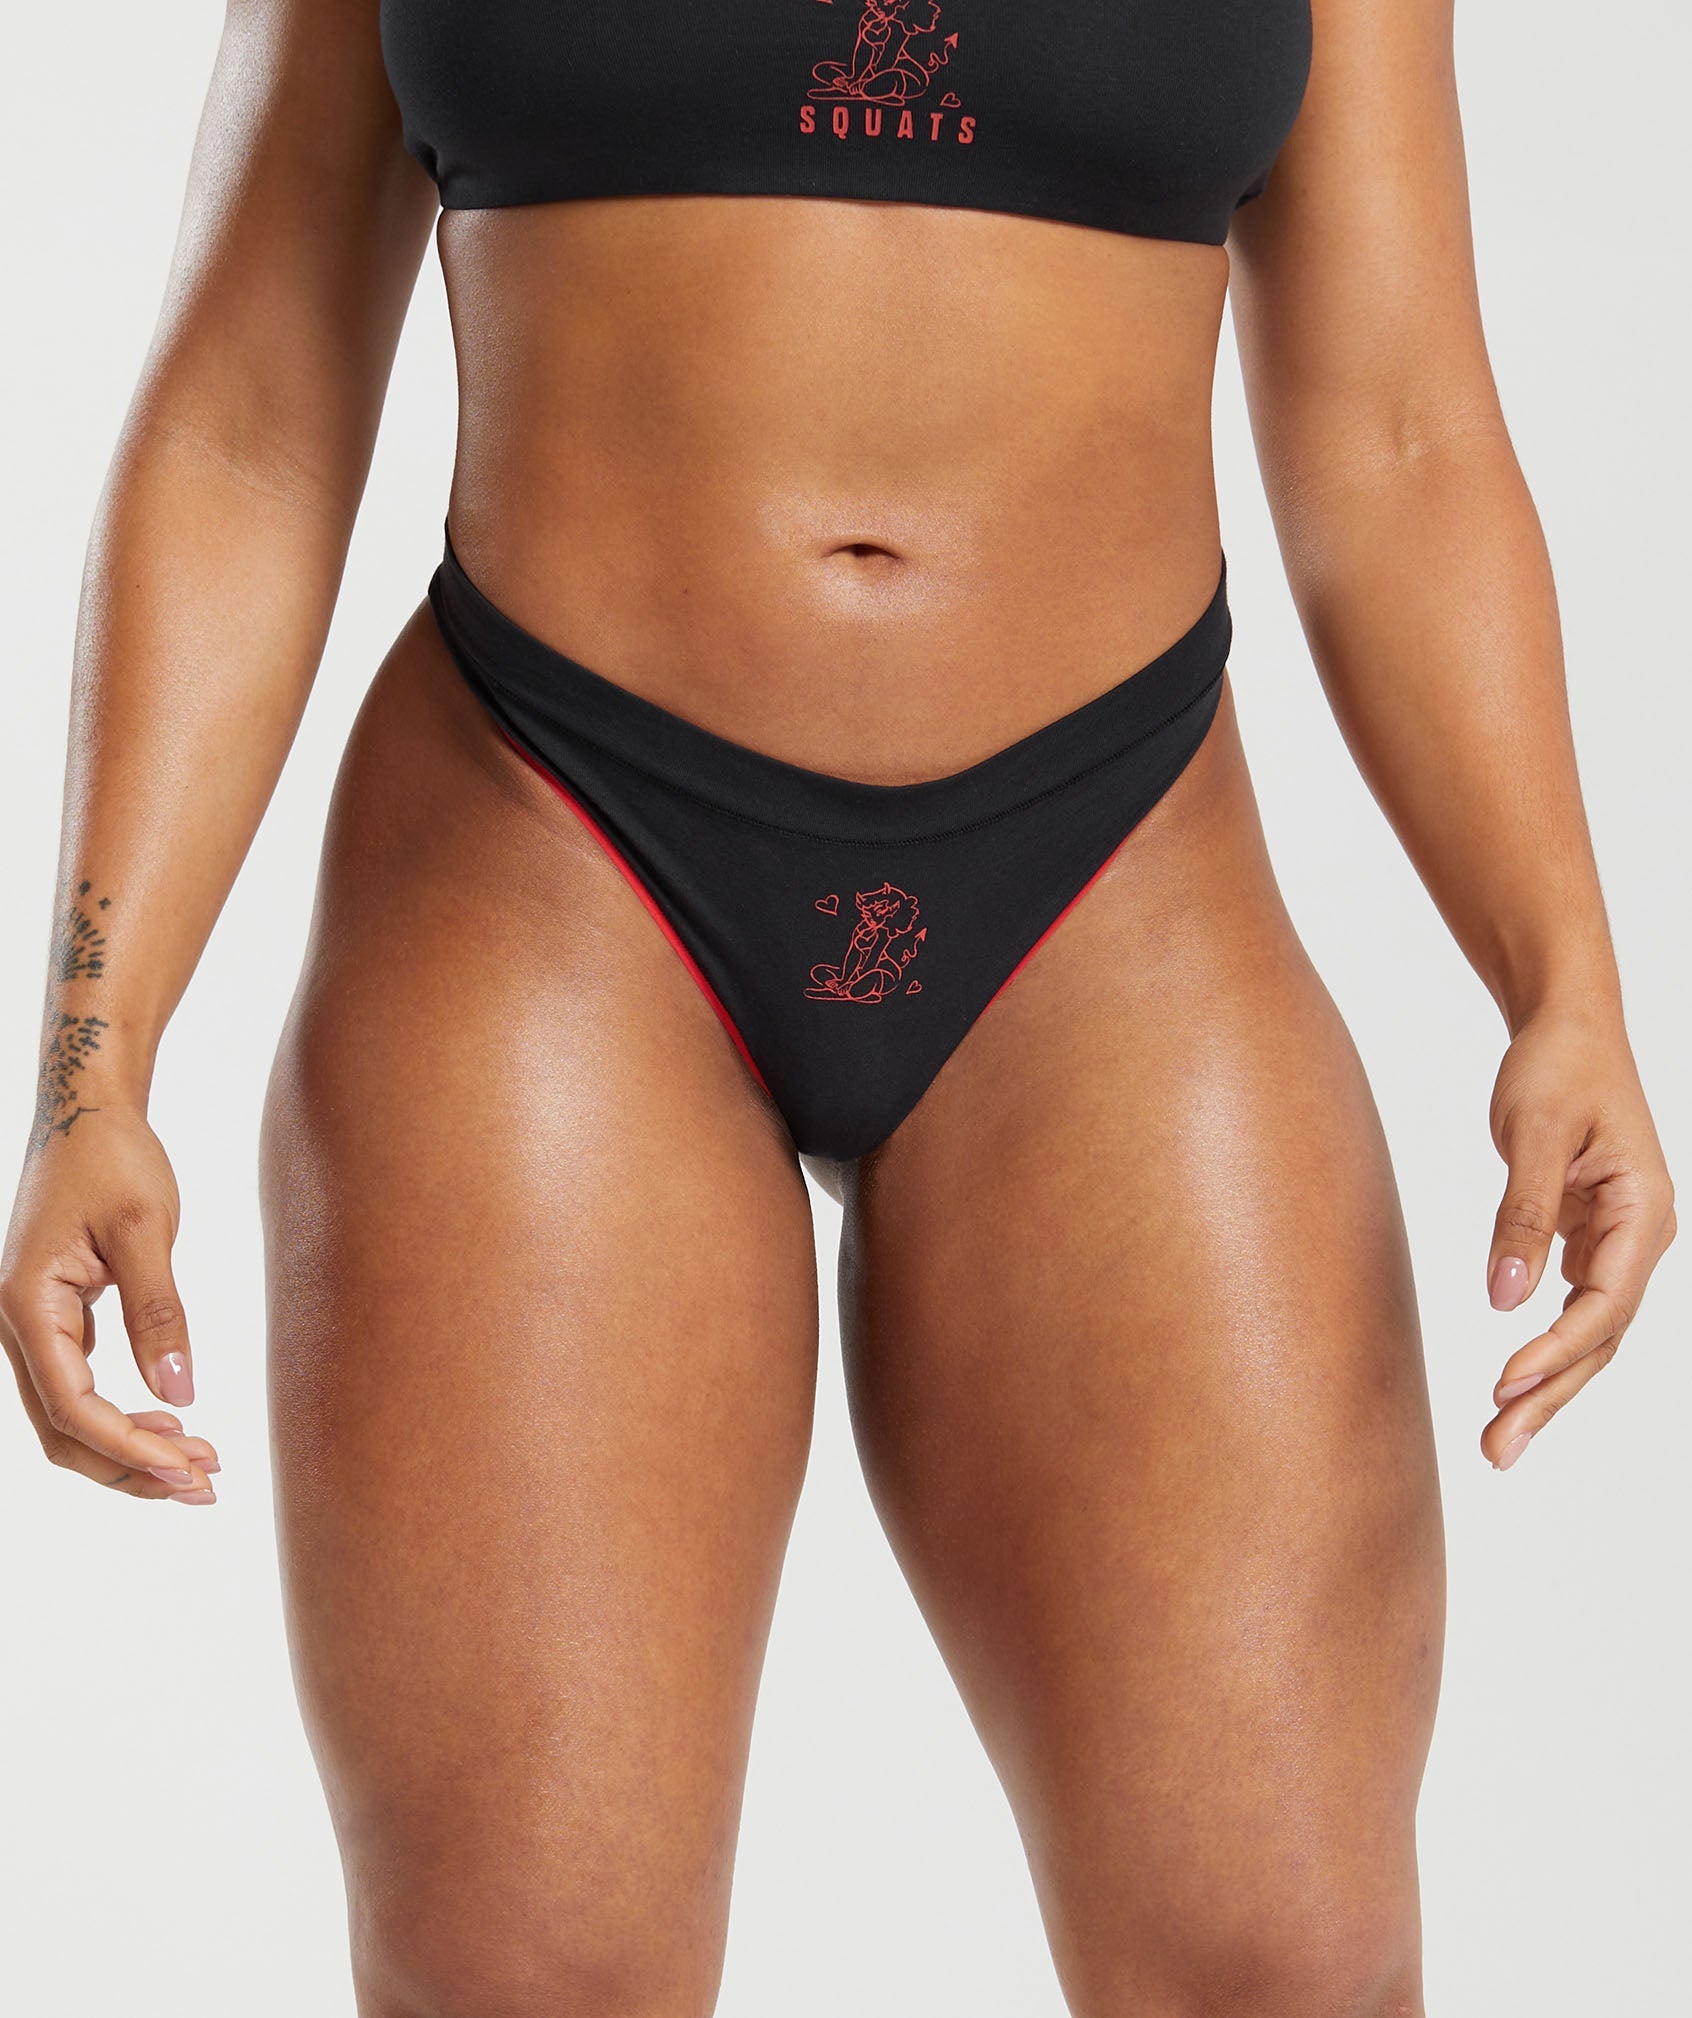 Gymshark Cotton High Rise Thong - Alice Pink